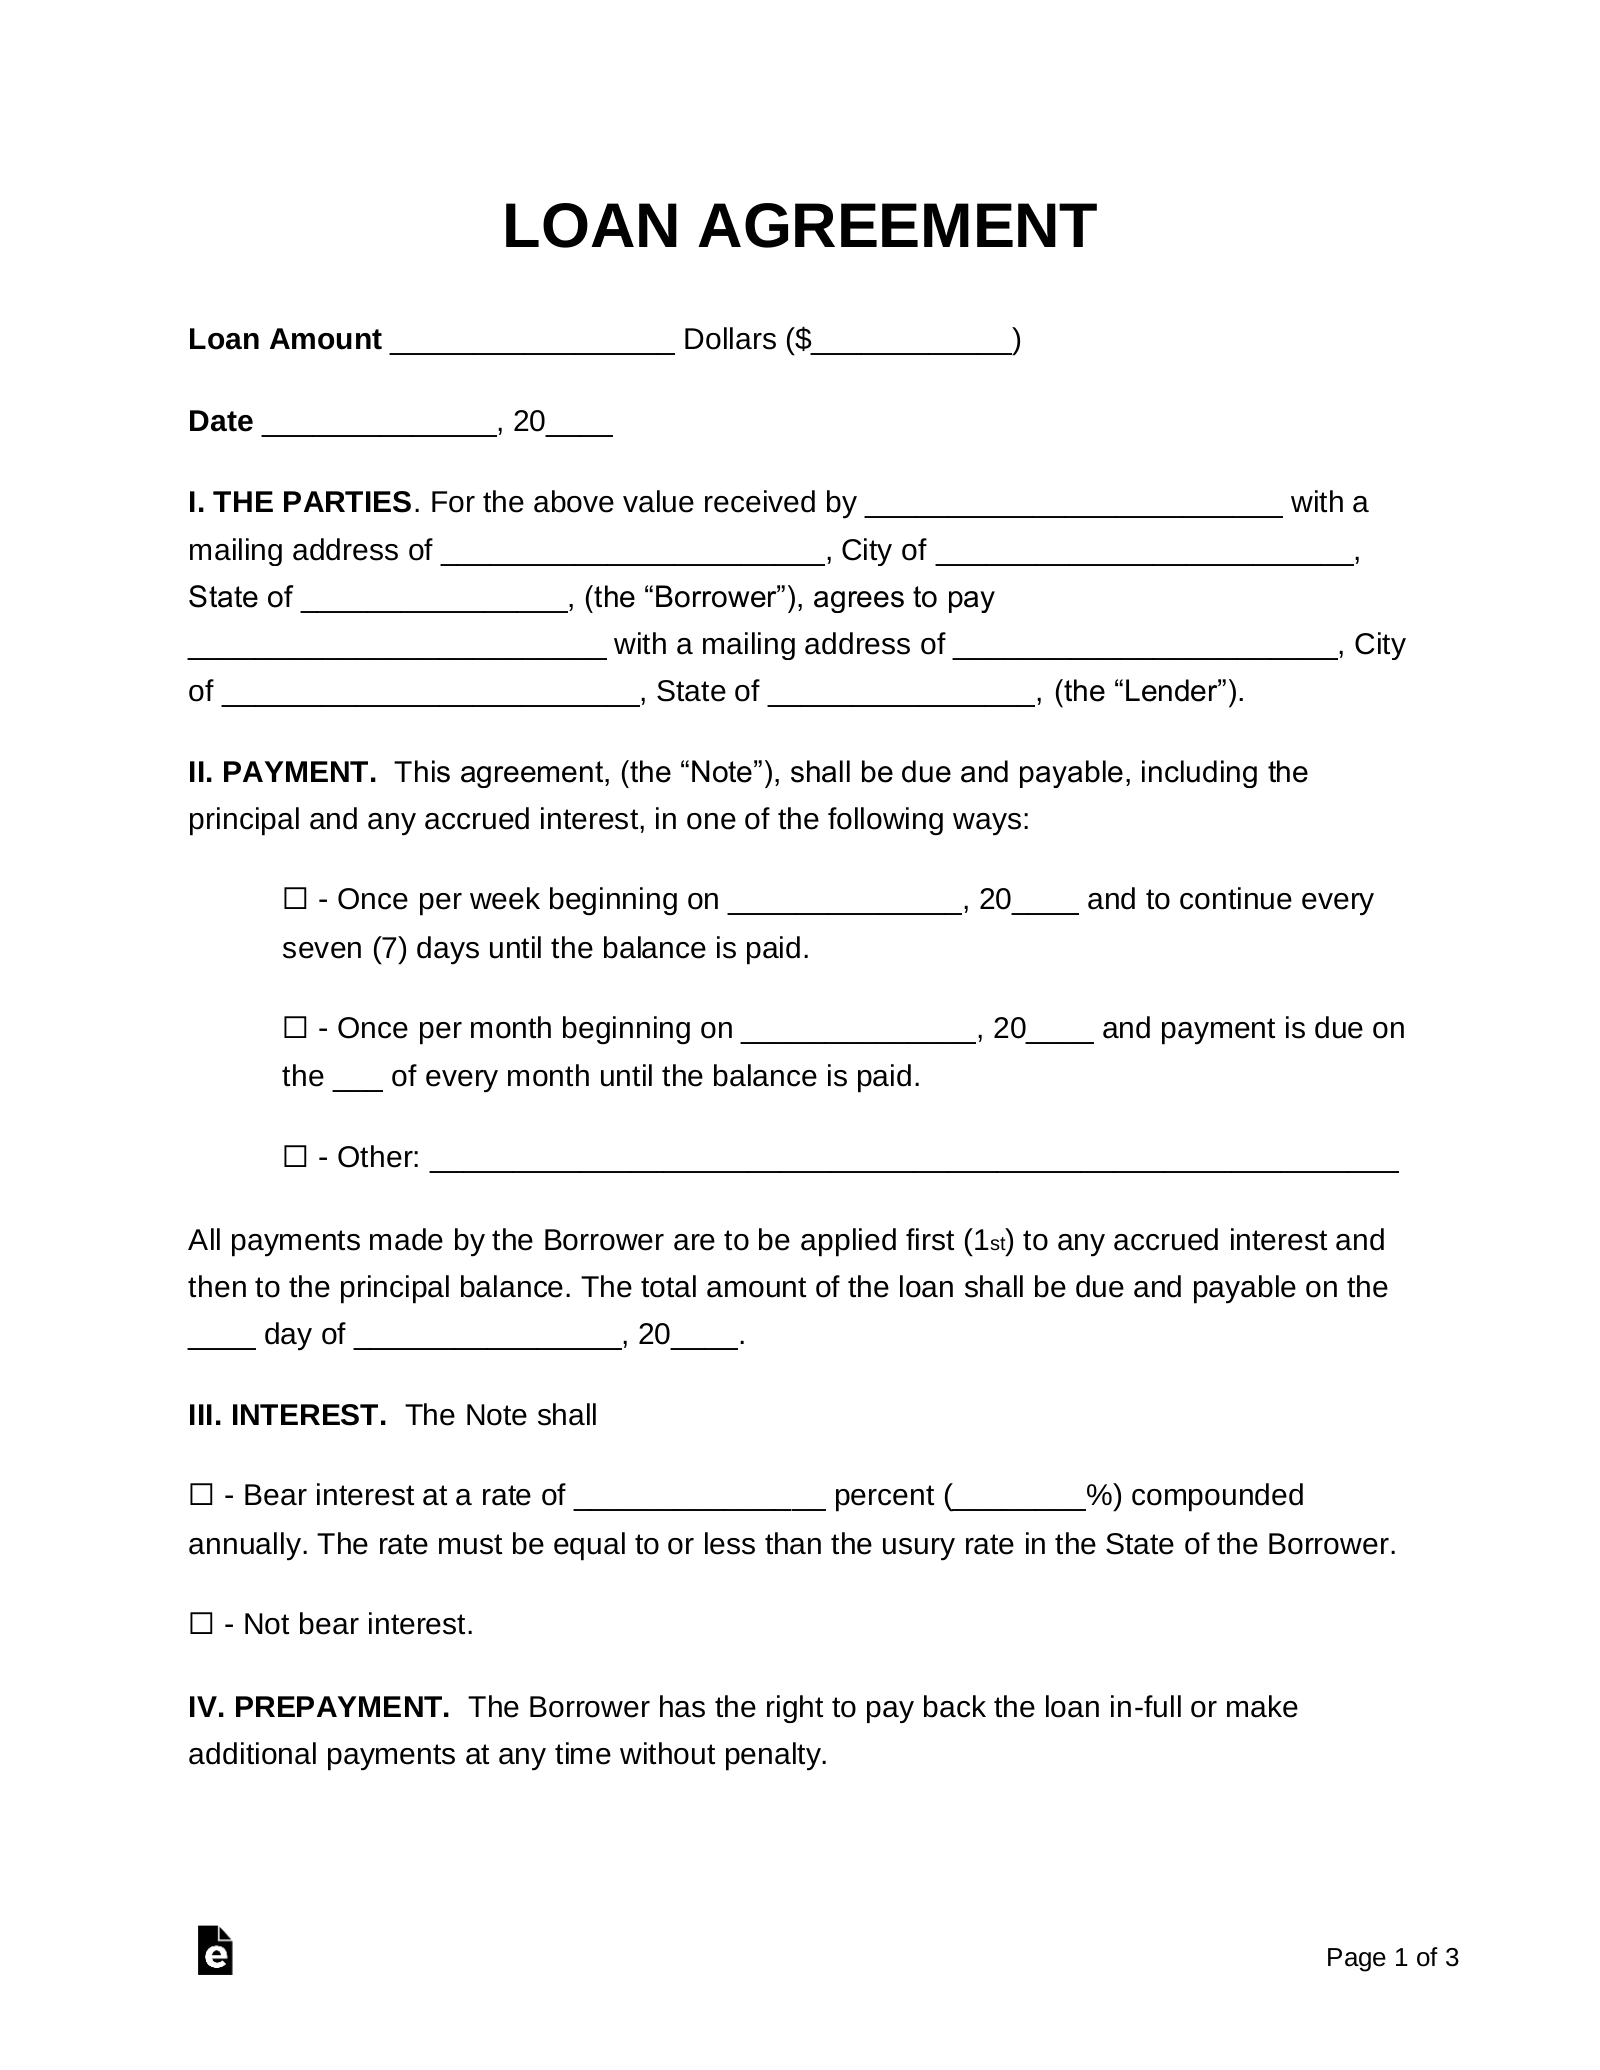 Free Loan Agreement Templates - Pdf | Word | Eforms – Free Within Blank Loan Agreement Template